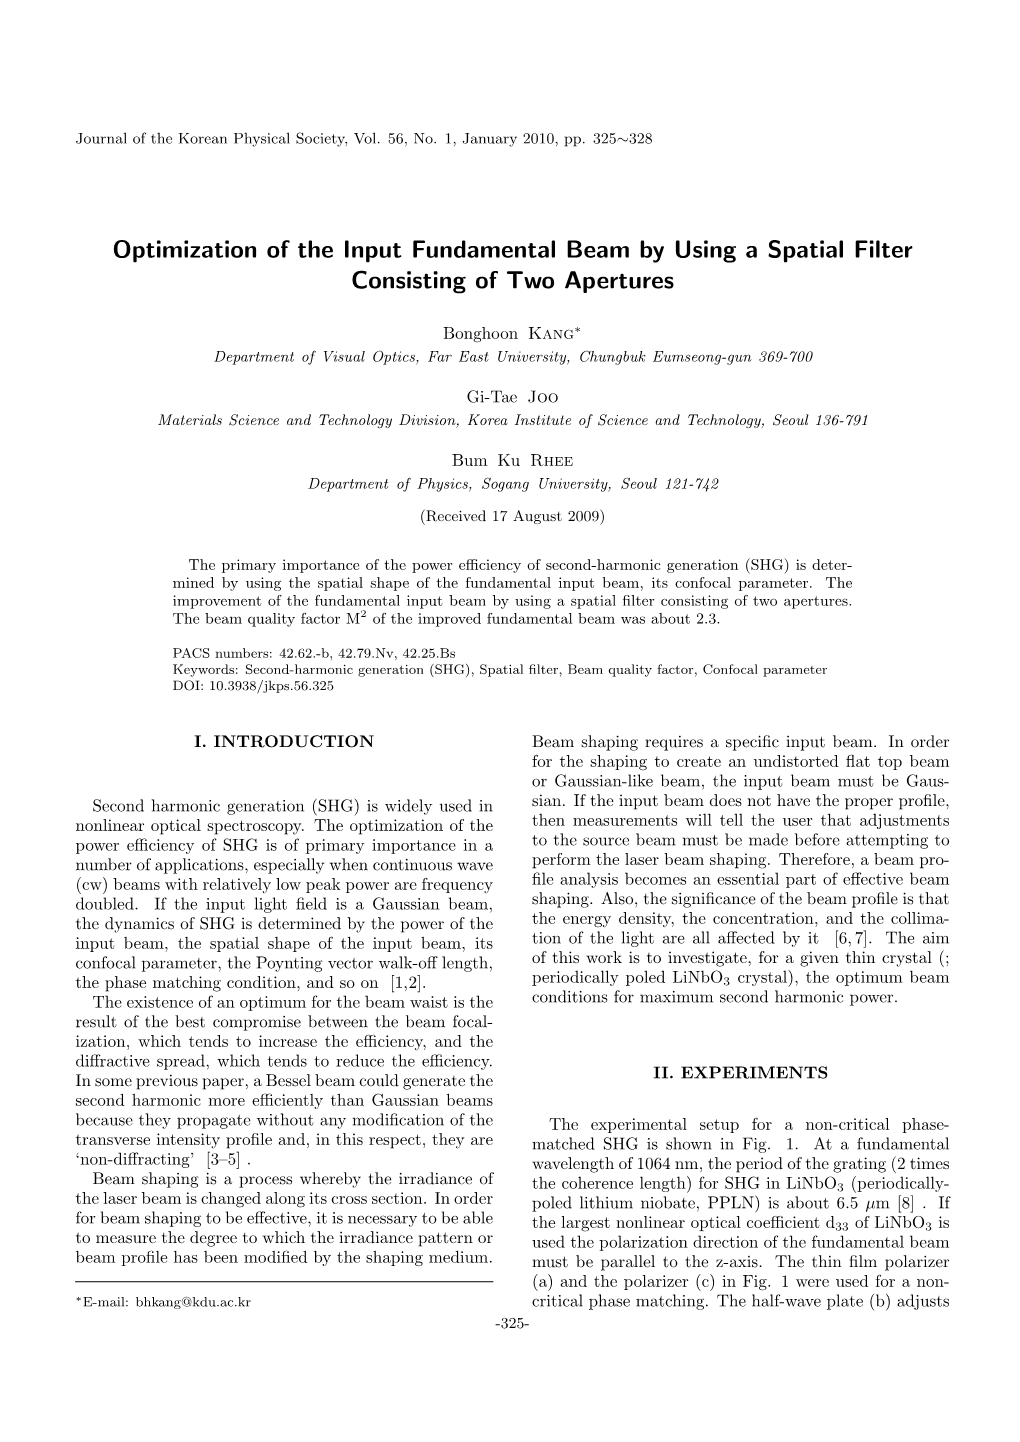 Optimization of the Input Fundamental Beam by Using a Spatial Filter Consisting of Two Apertures